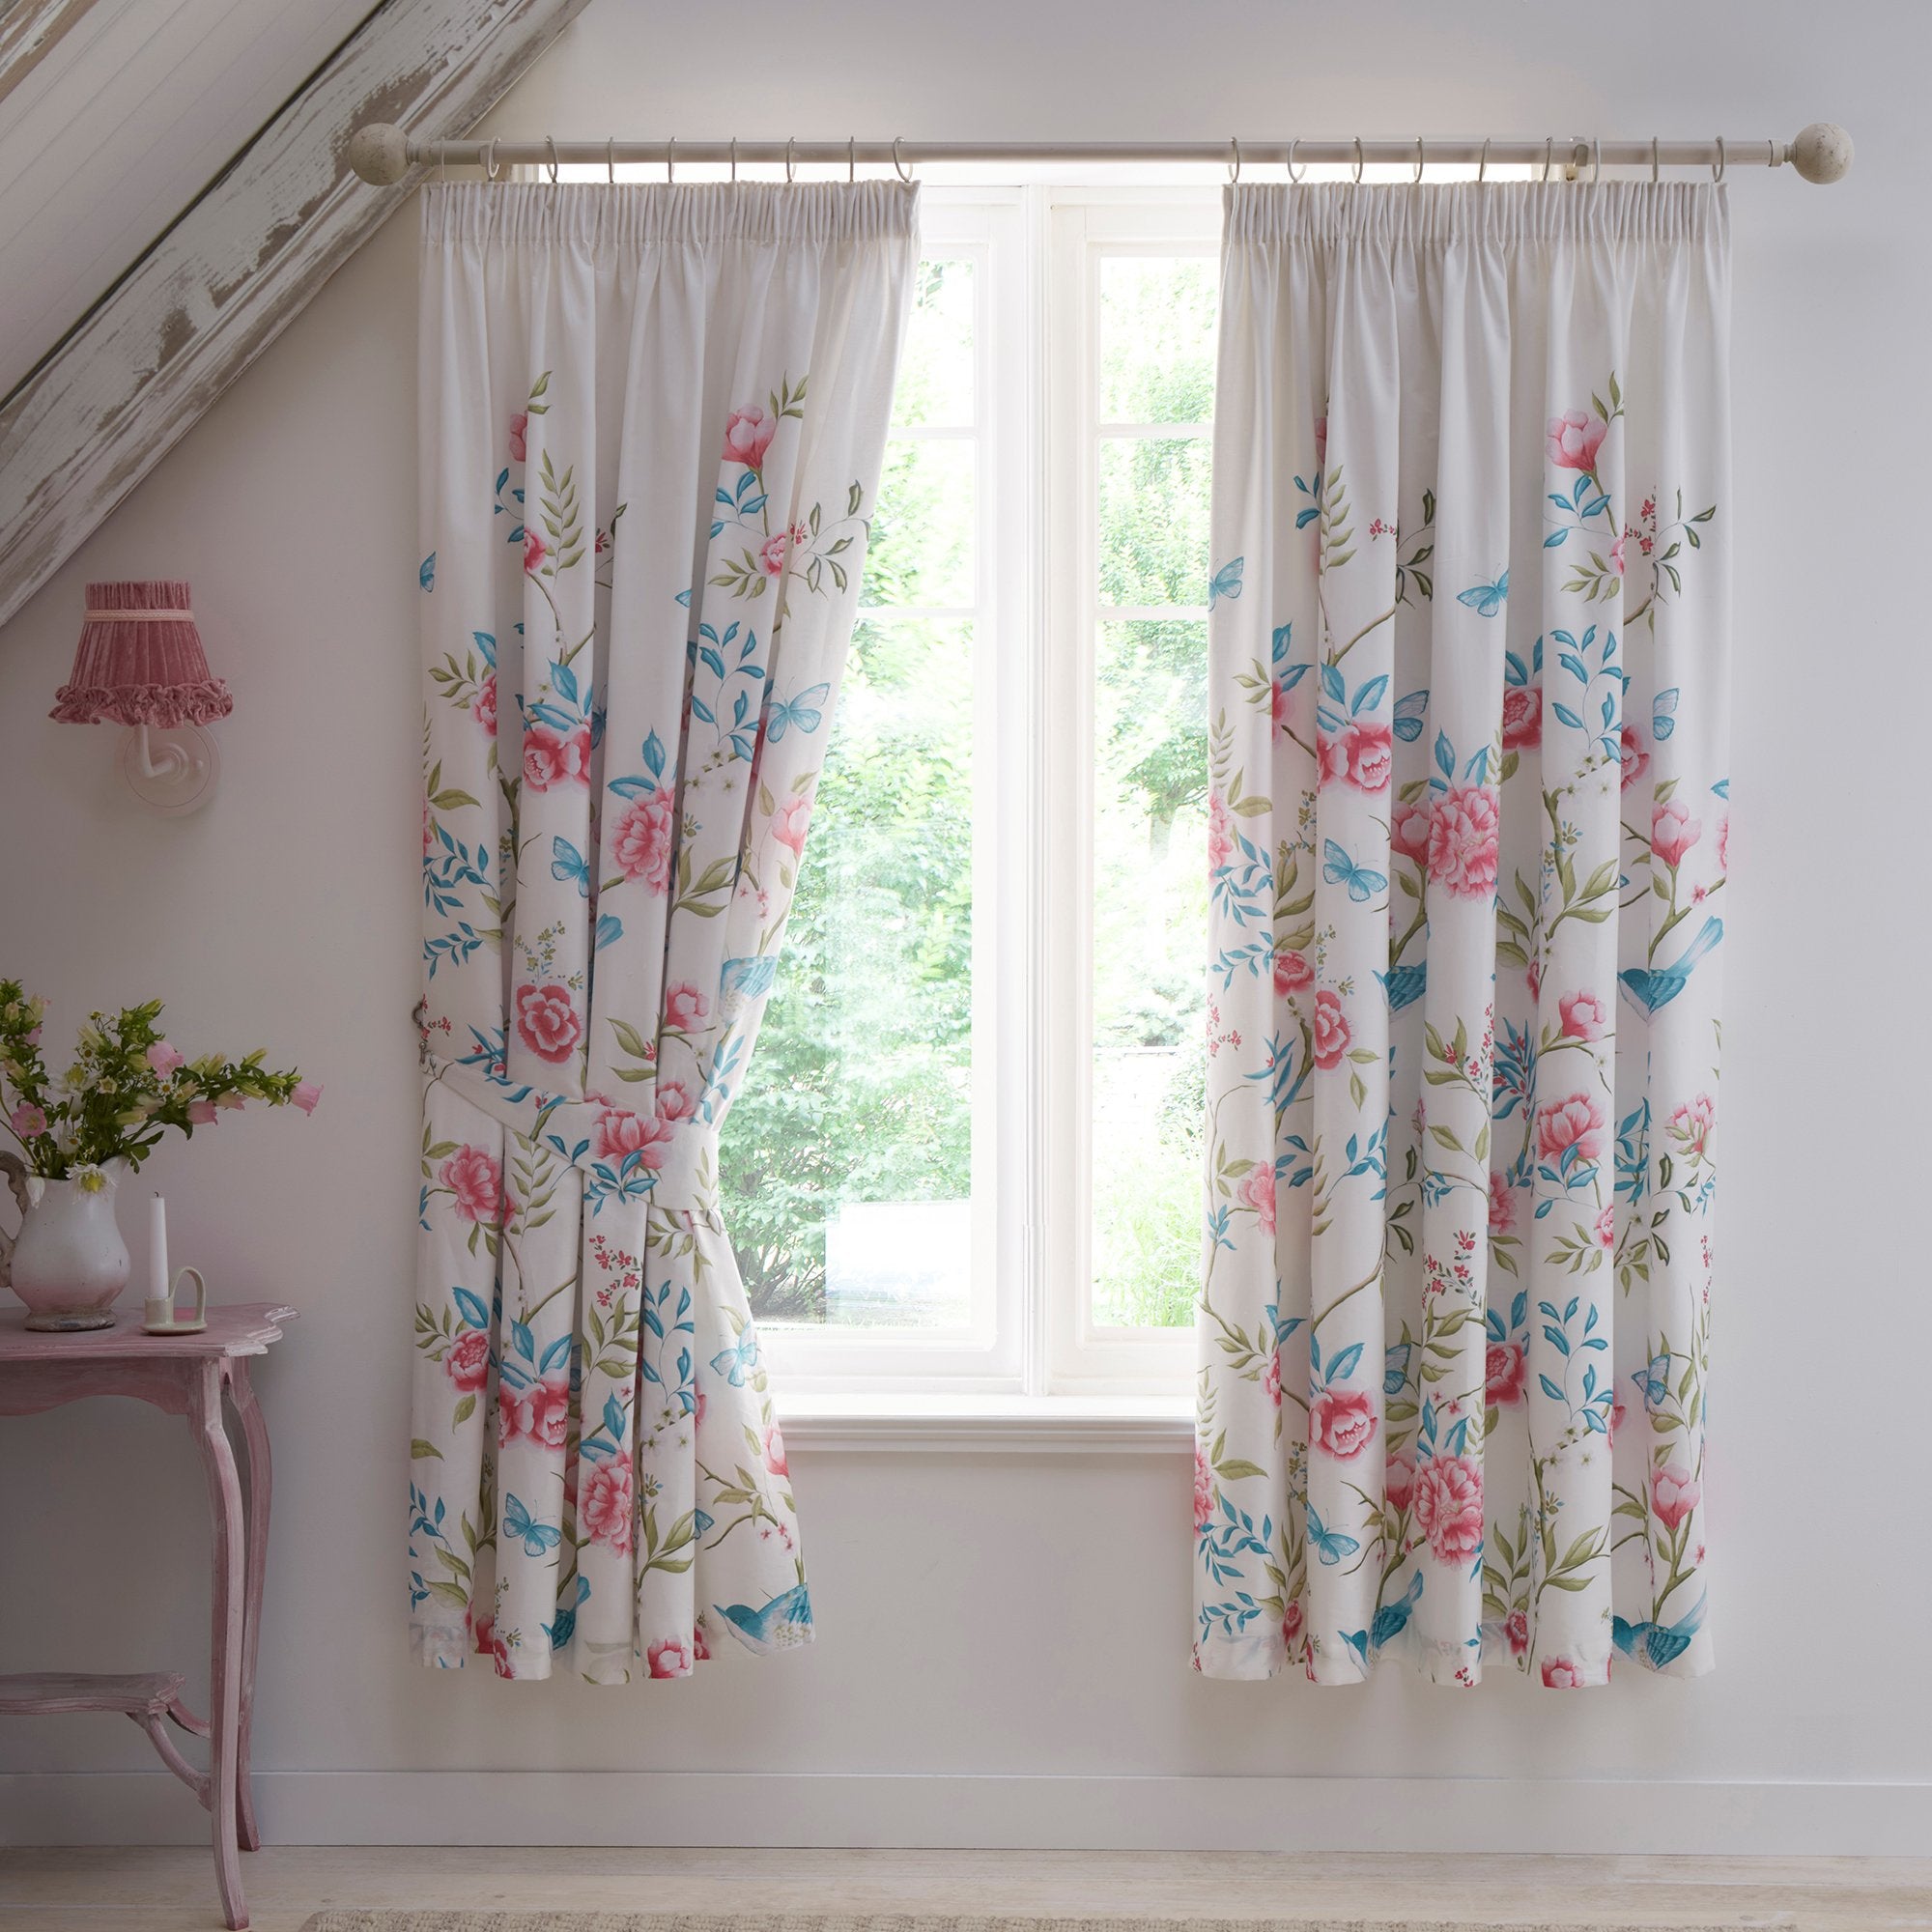 Pair of Pencil Pleat Curtains With Tie-Backs Amelle by Dreams & Drapes Design in Blue